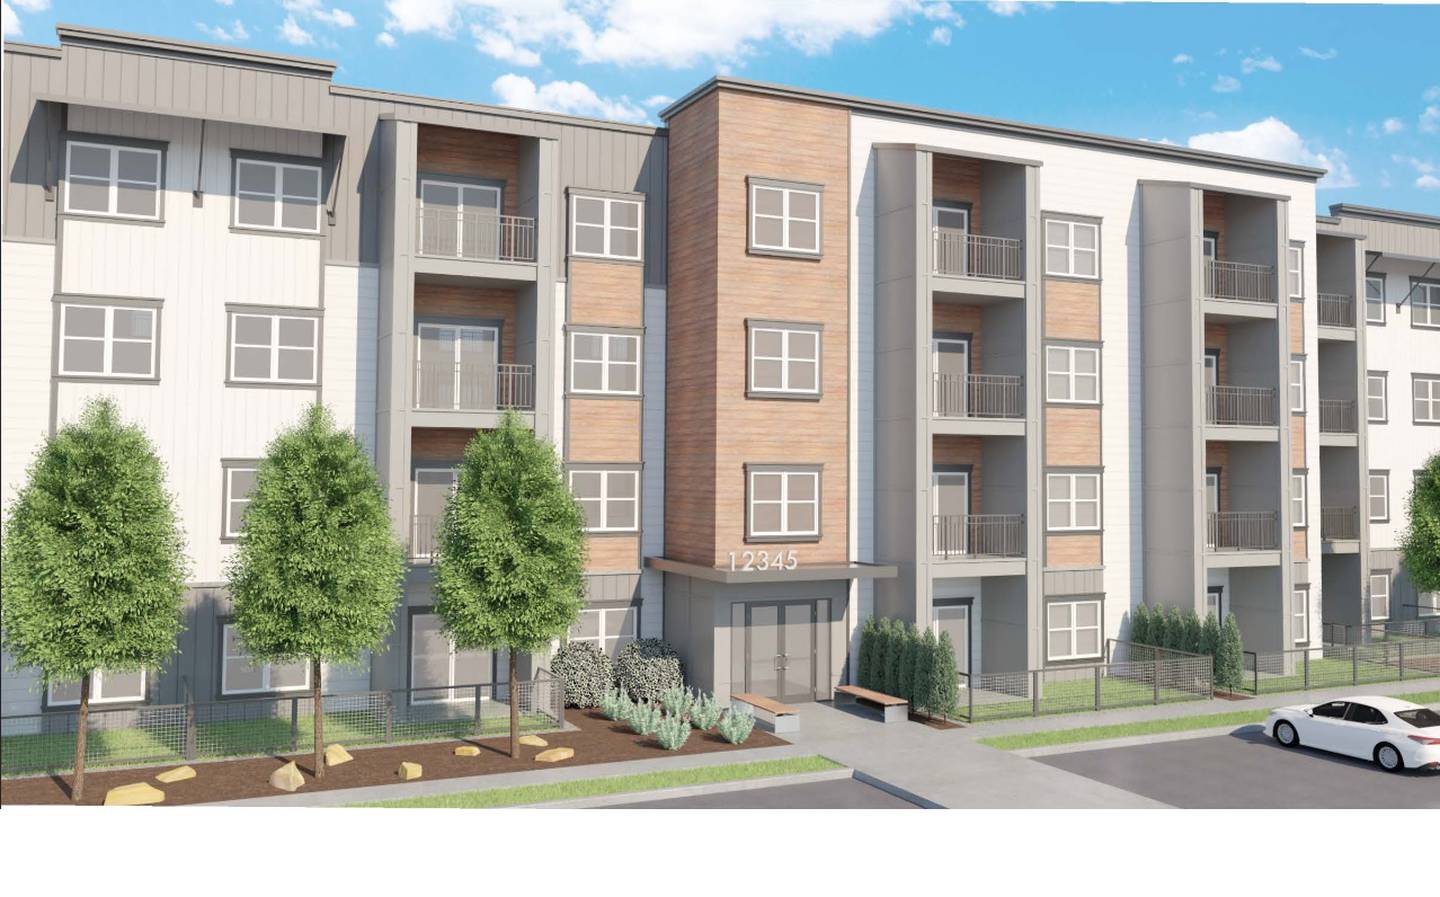 A rendering of a building from a 400-unit development by Lynd Living. Lynd appeared in front of the Huntley Village Board at its April 28, 2022 meeting to pitch a series of changes to the project, which was originally proposed in February.